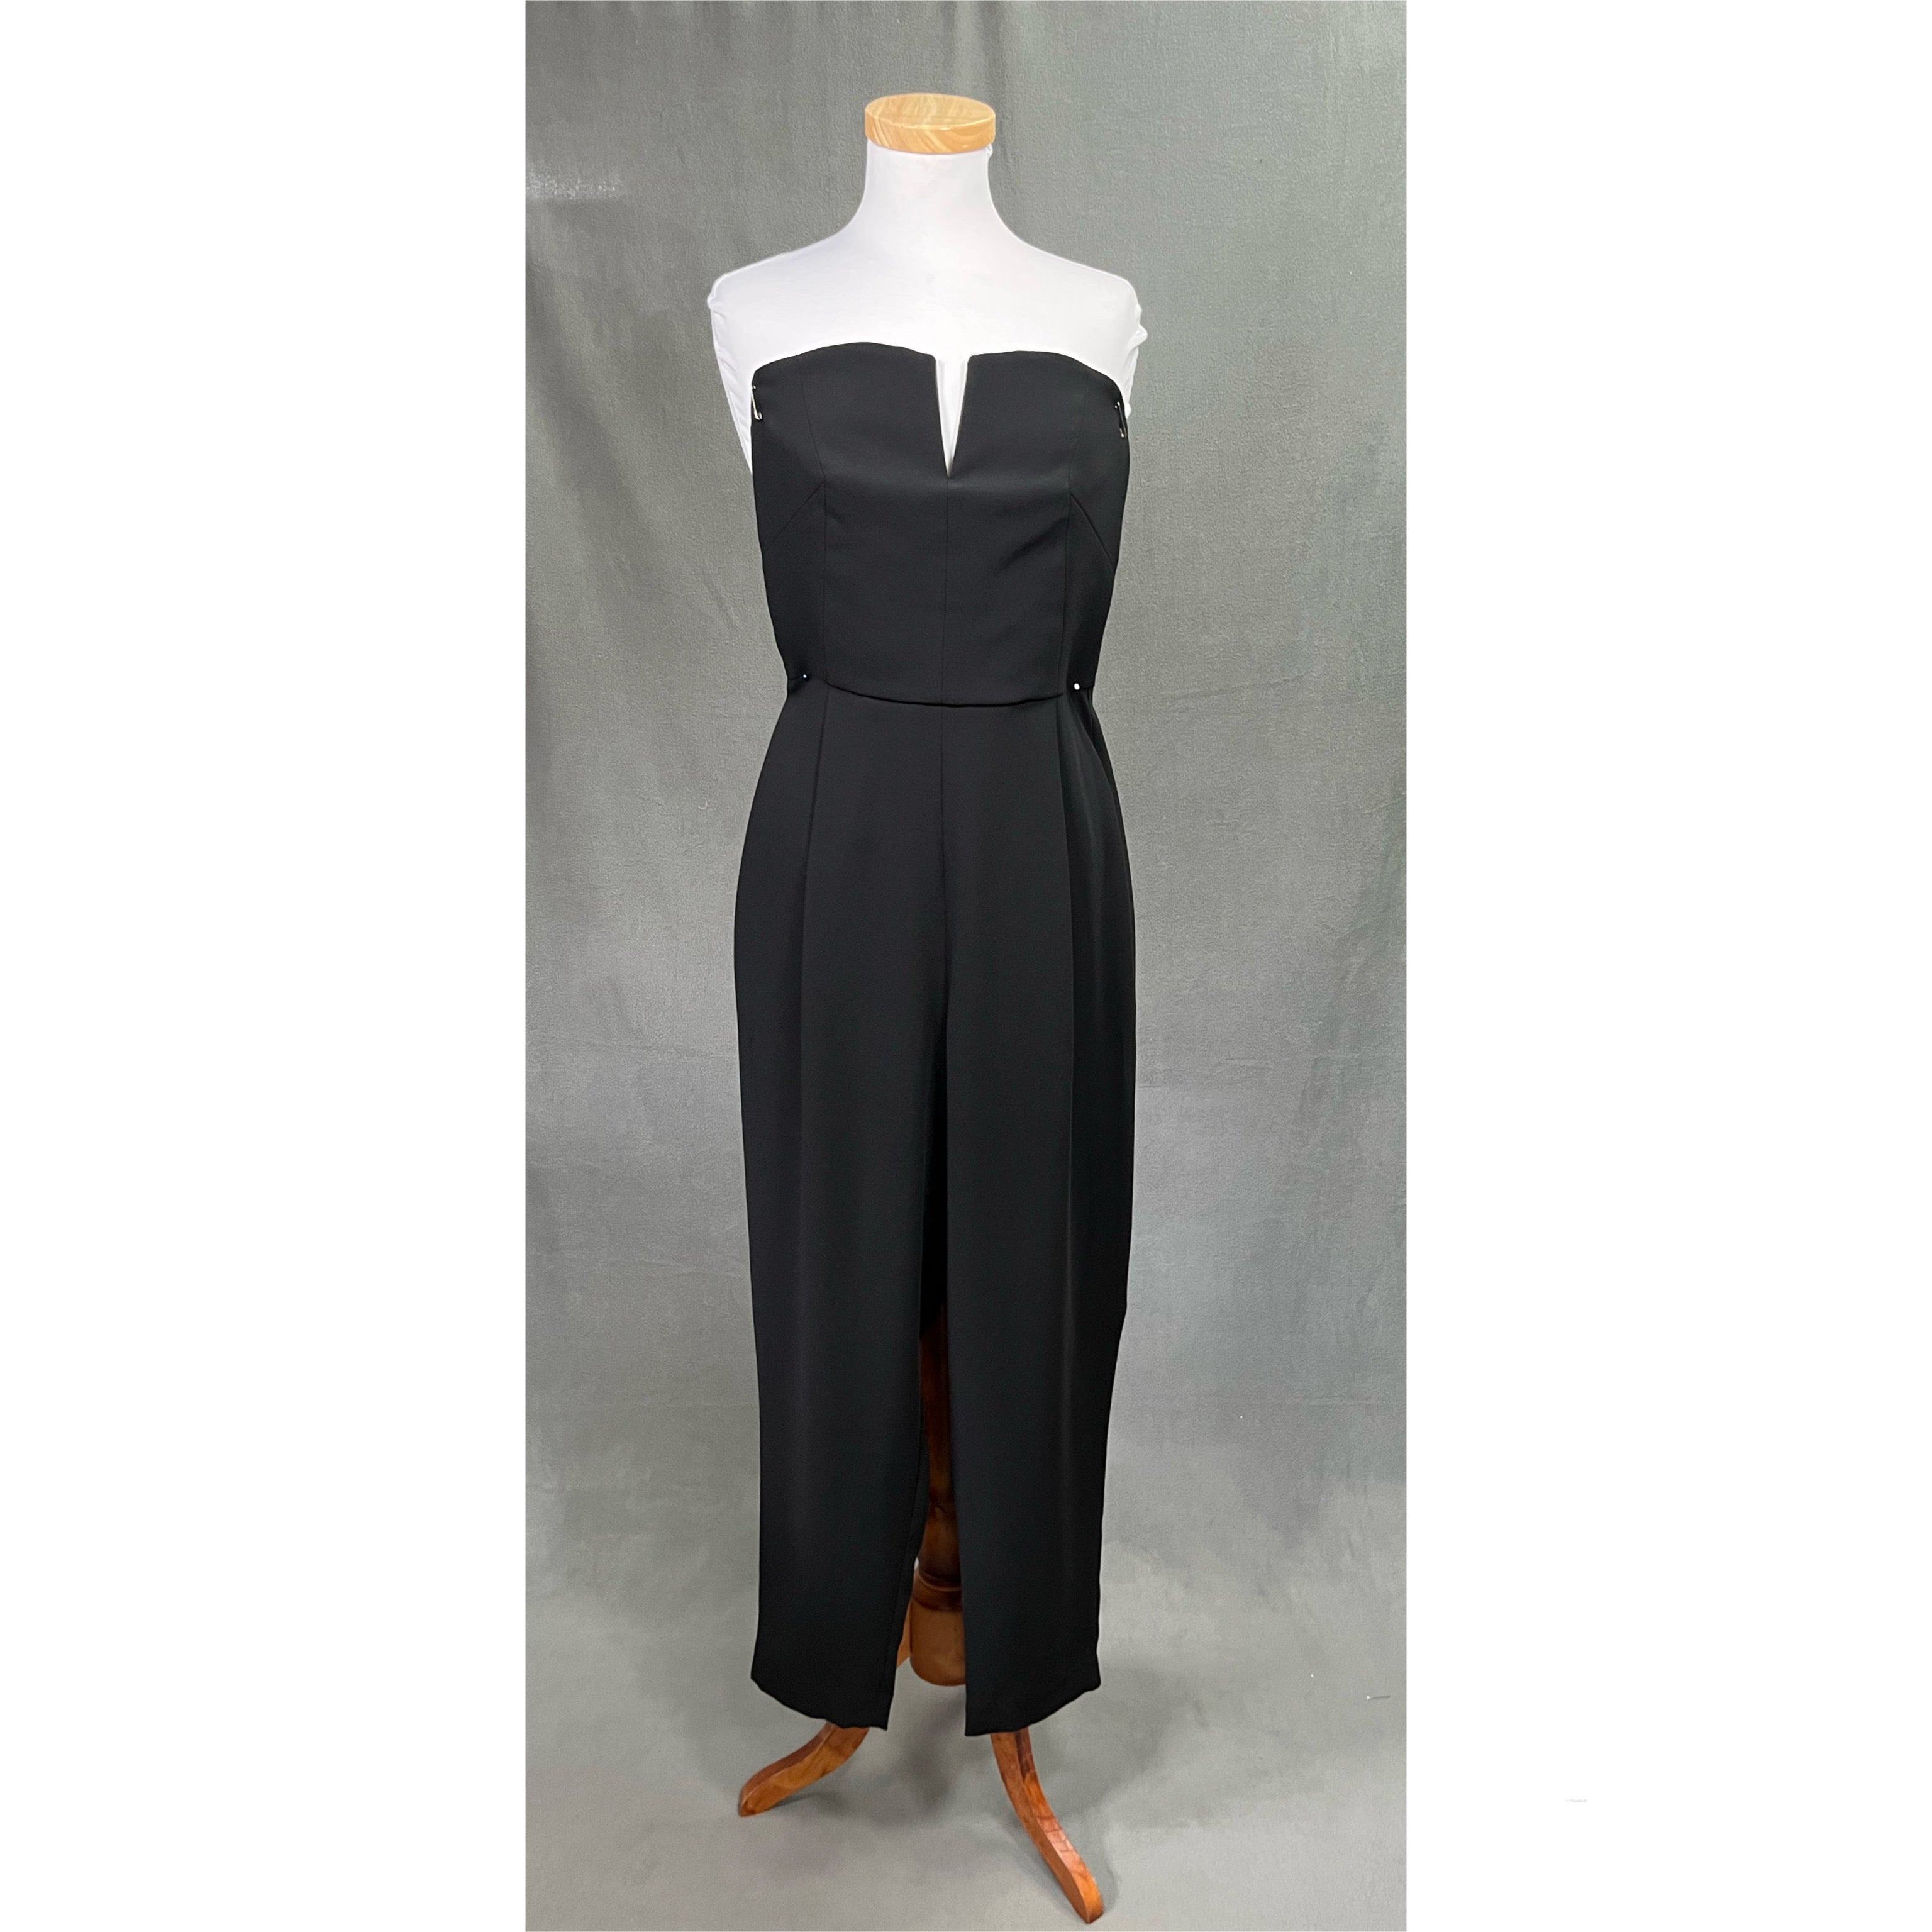 Topshop black strapless jumpsuit, size 8, LIKE NEW!